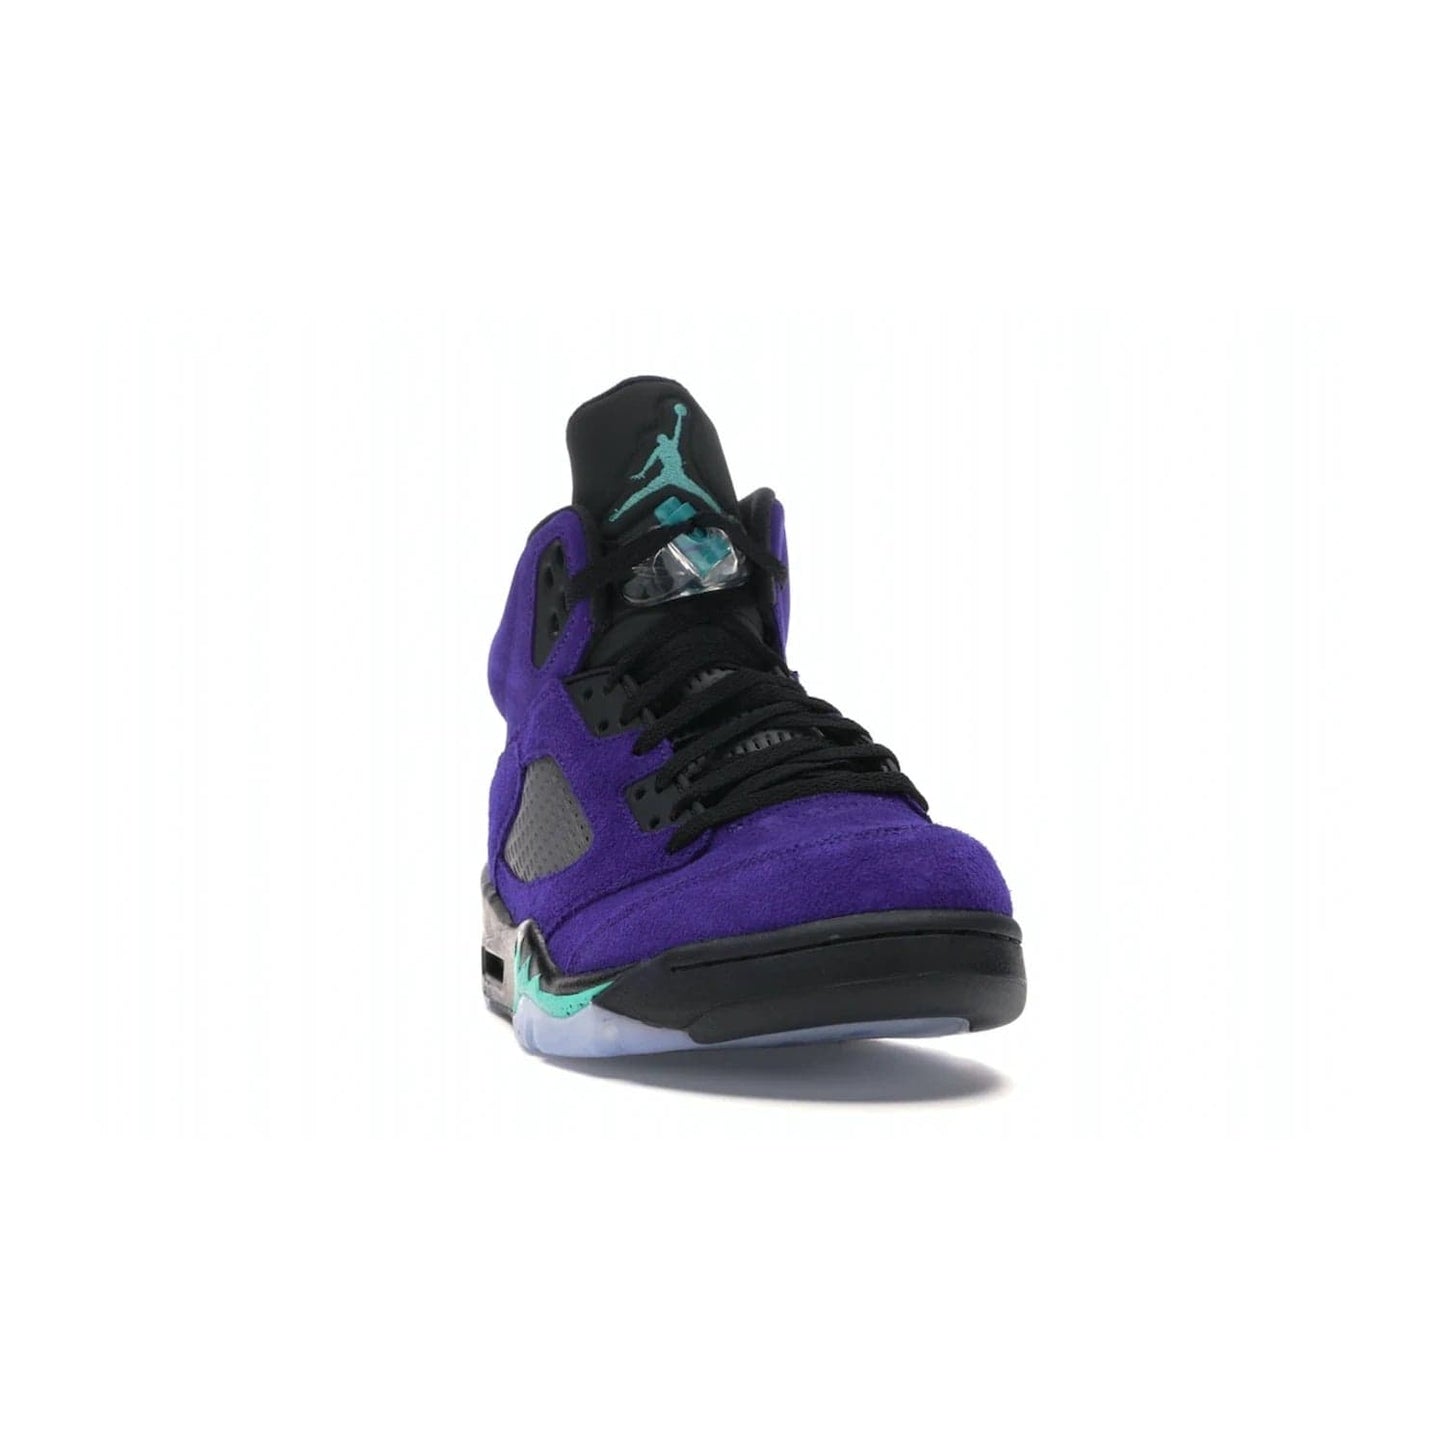 Jordan 5 Retro Alternate Grape - Image 8 - Only at www.BallersClubKickz.com - Bring the classic Jordan 5 Retro Alternate Grape to your sneaker collection! Featuring a purple suede upper, charcoal underlays, green detailing, and an icy and green outsole. Releasing for the first time since 1990, don't miss this chance to add a piece of sneaker history to your collection.